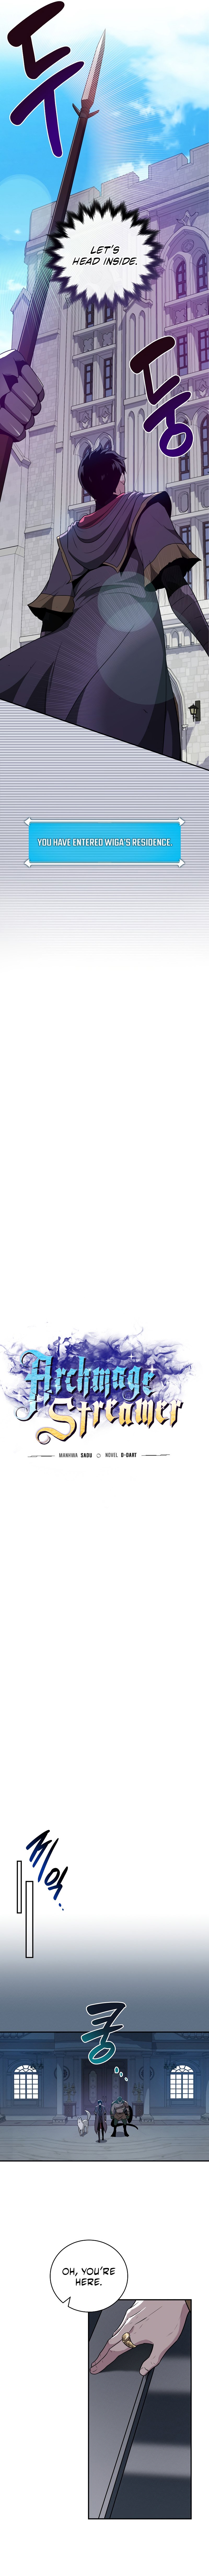 archmage-streamer-chap-31-2